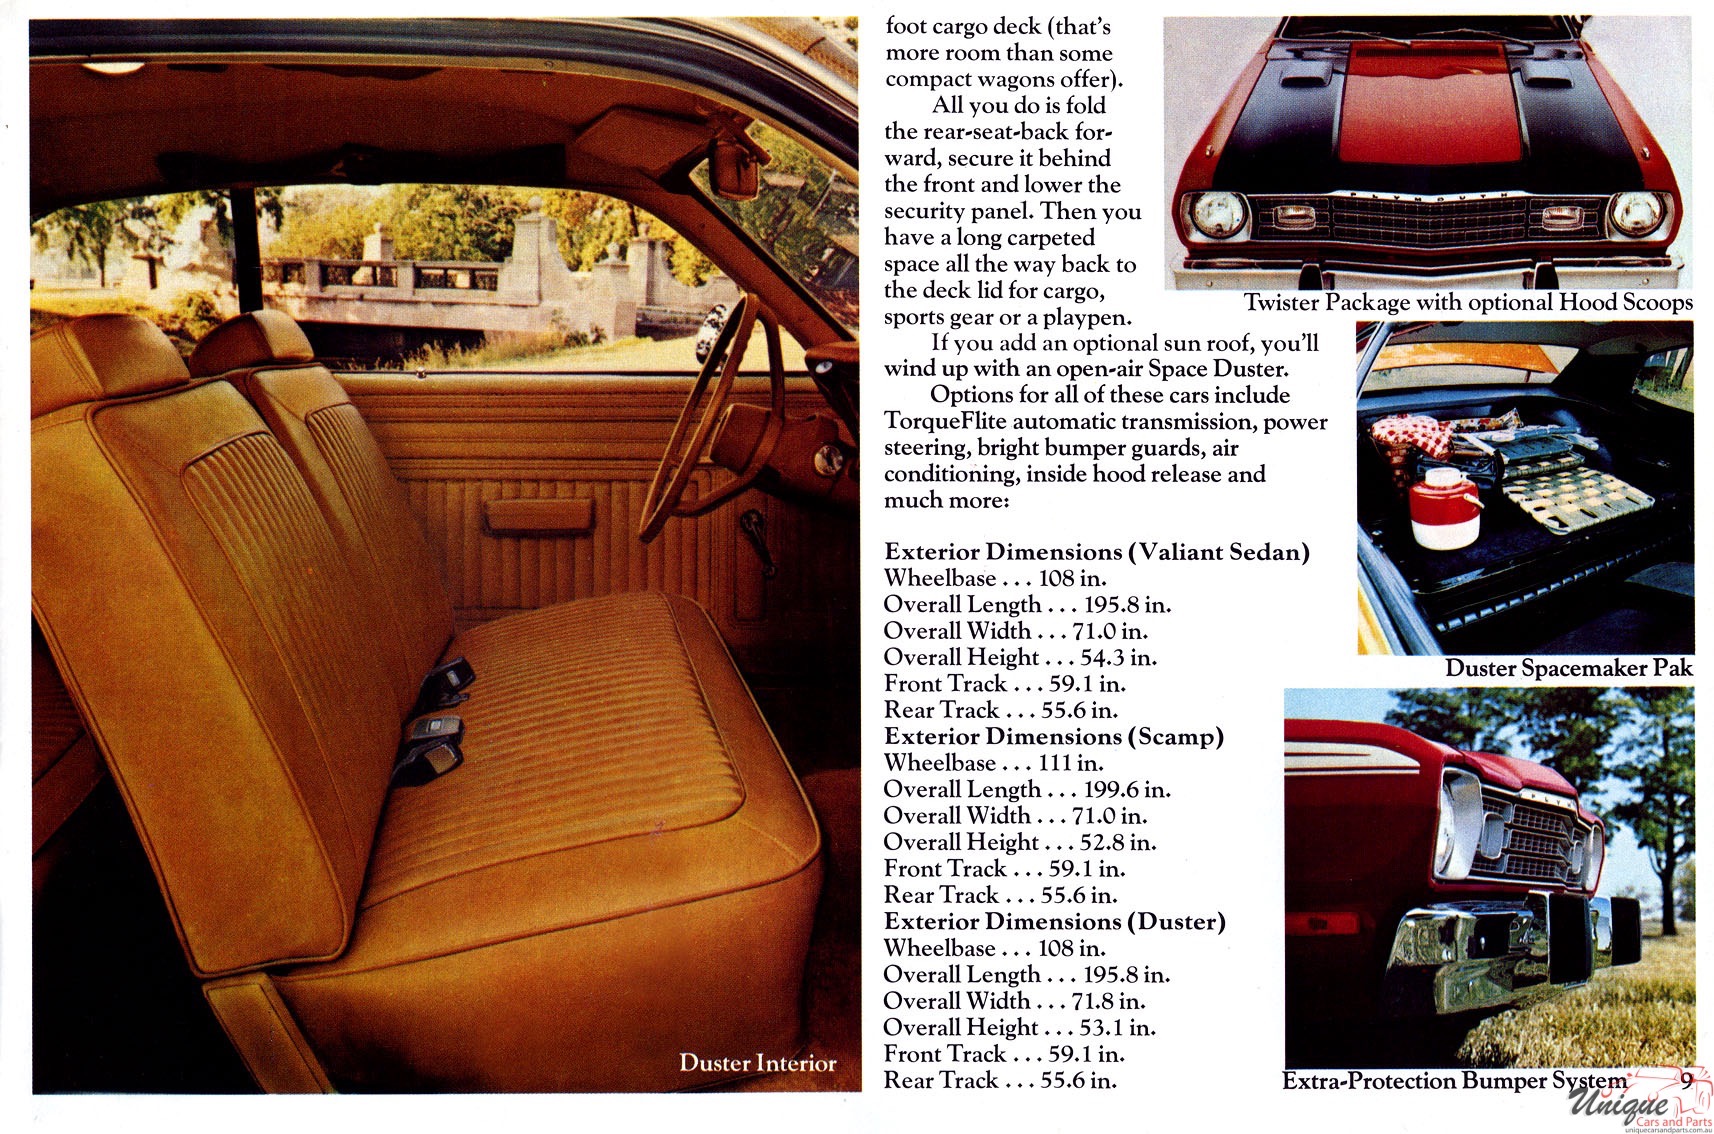 1973 Chrysler-Plymouth Brochure Page 16